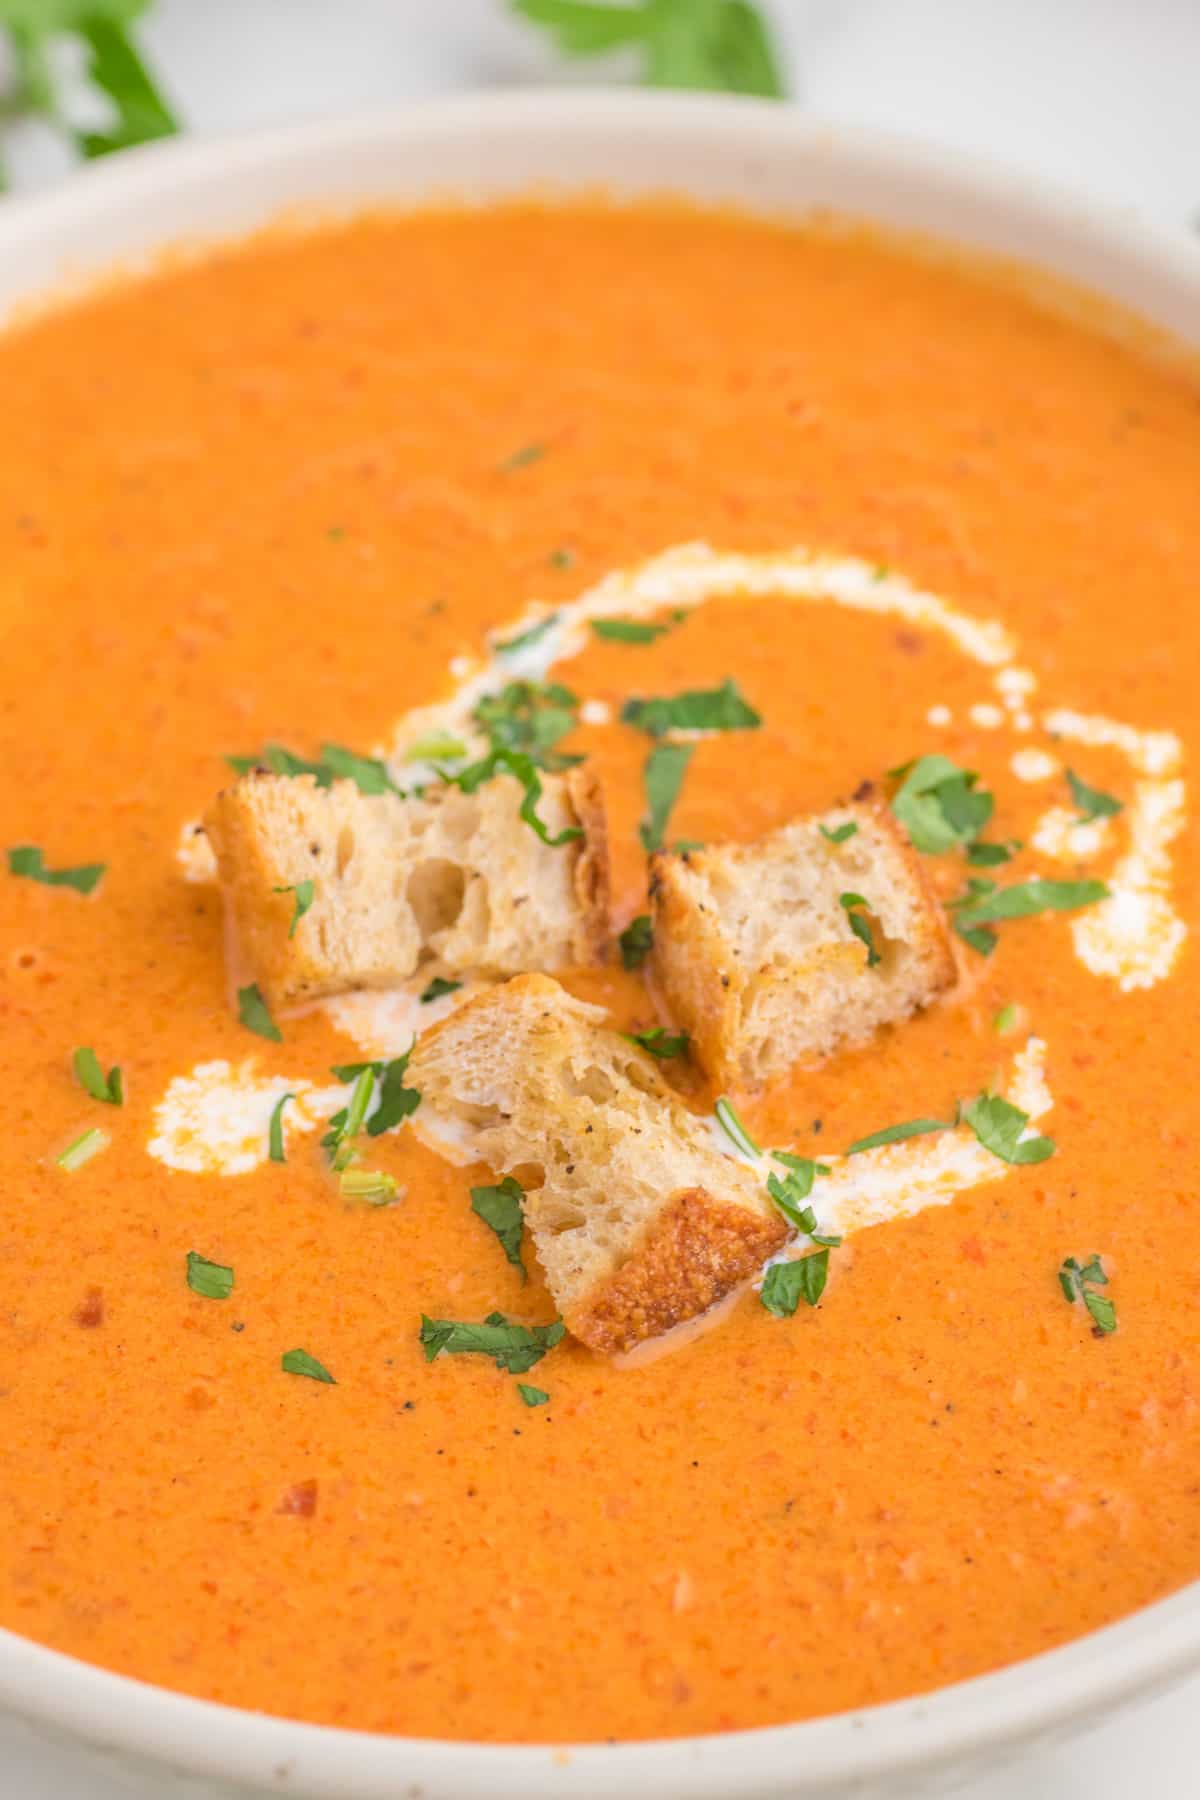 Roasted red pepper bisque serve in a white bowl with croutons for garnish, close up